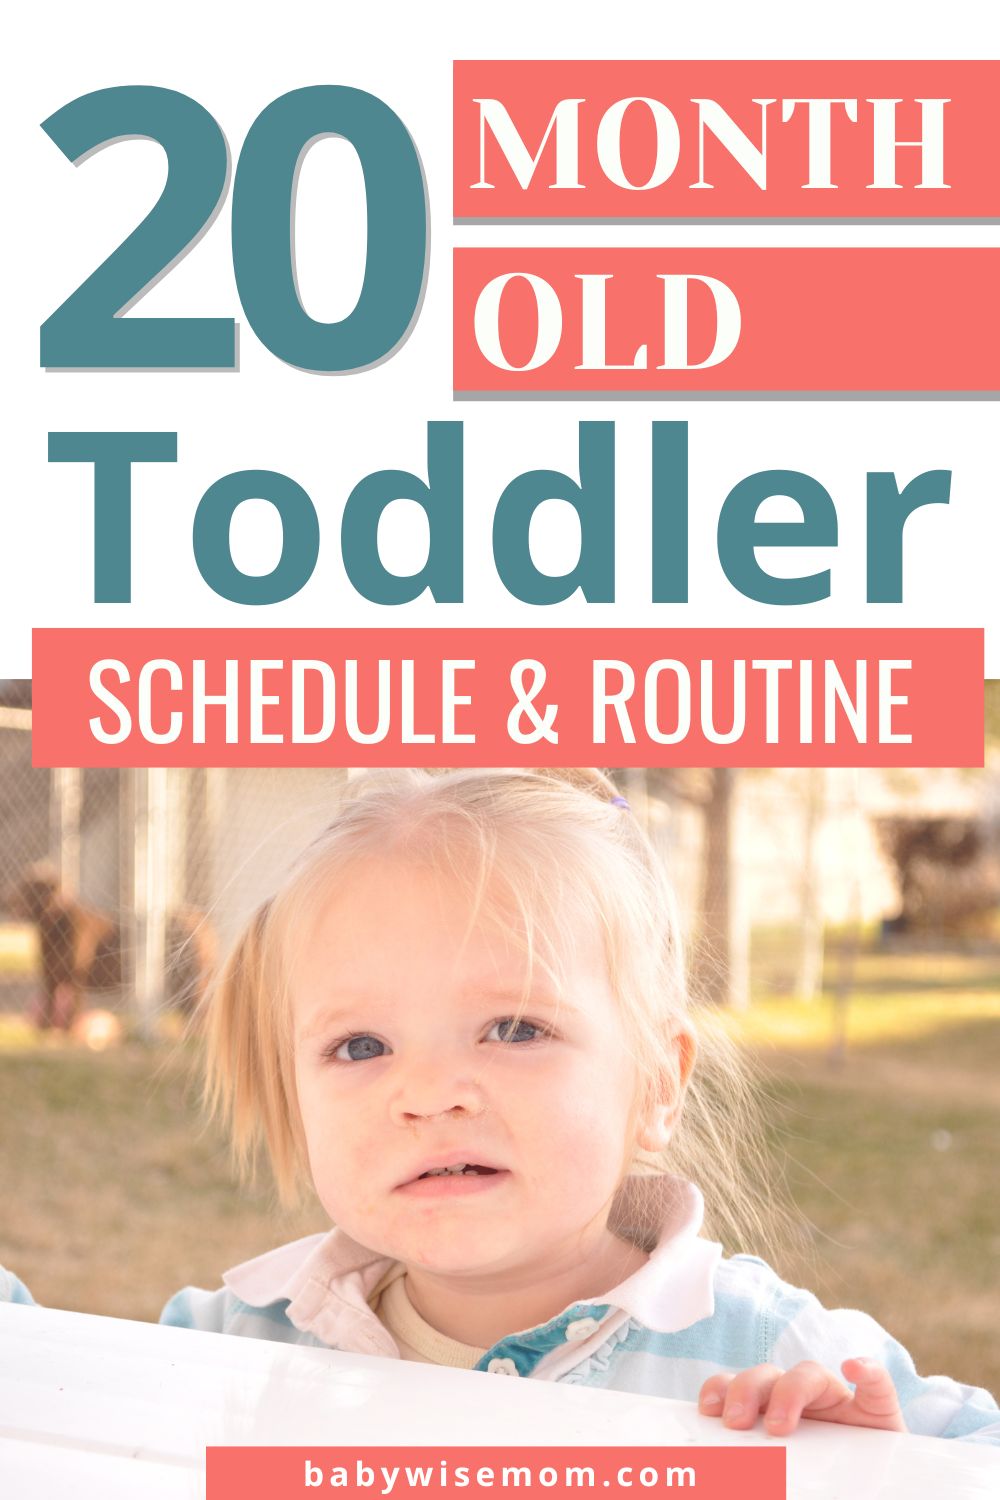 20 month old toddler schedule and routine pinnable image